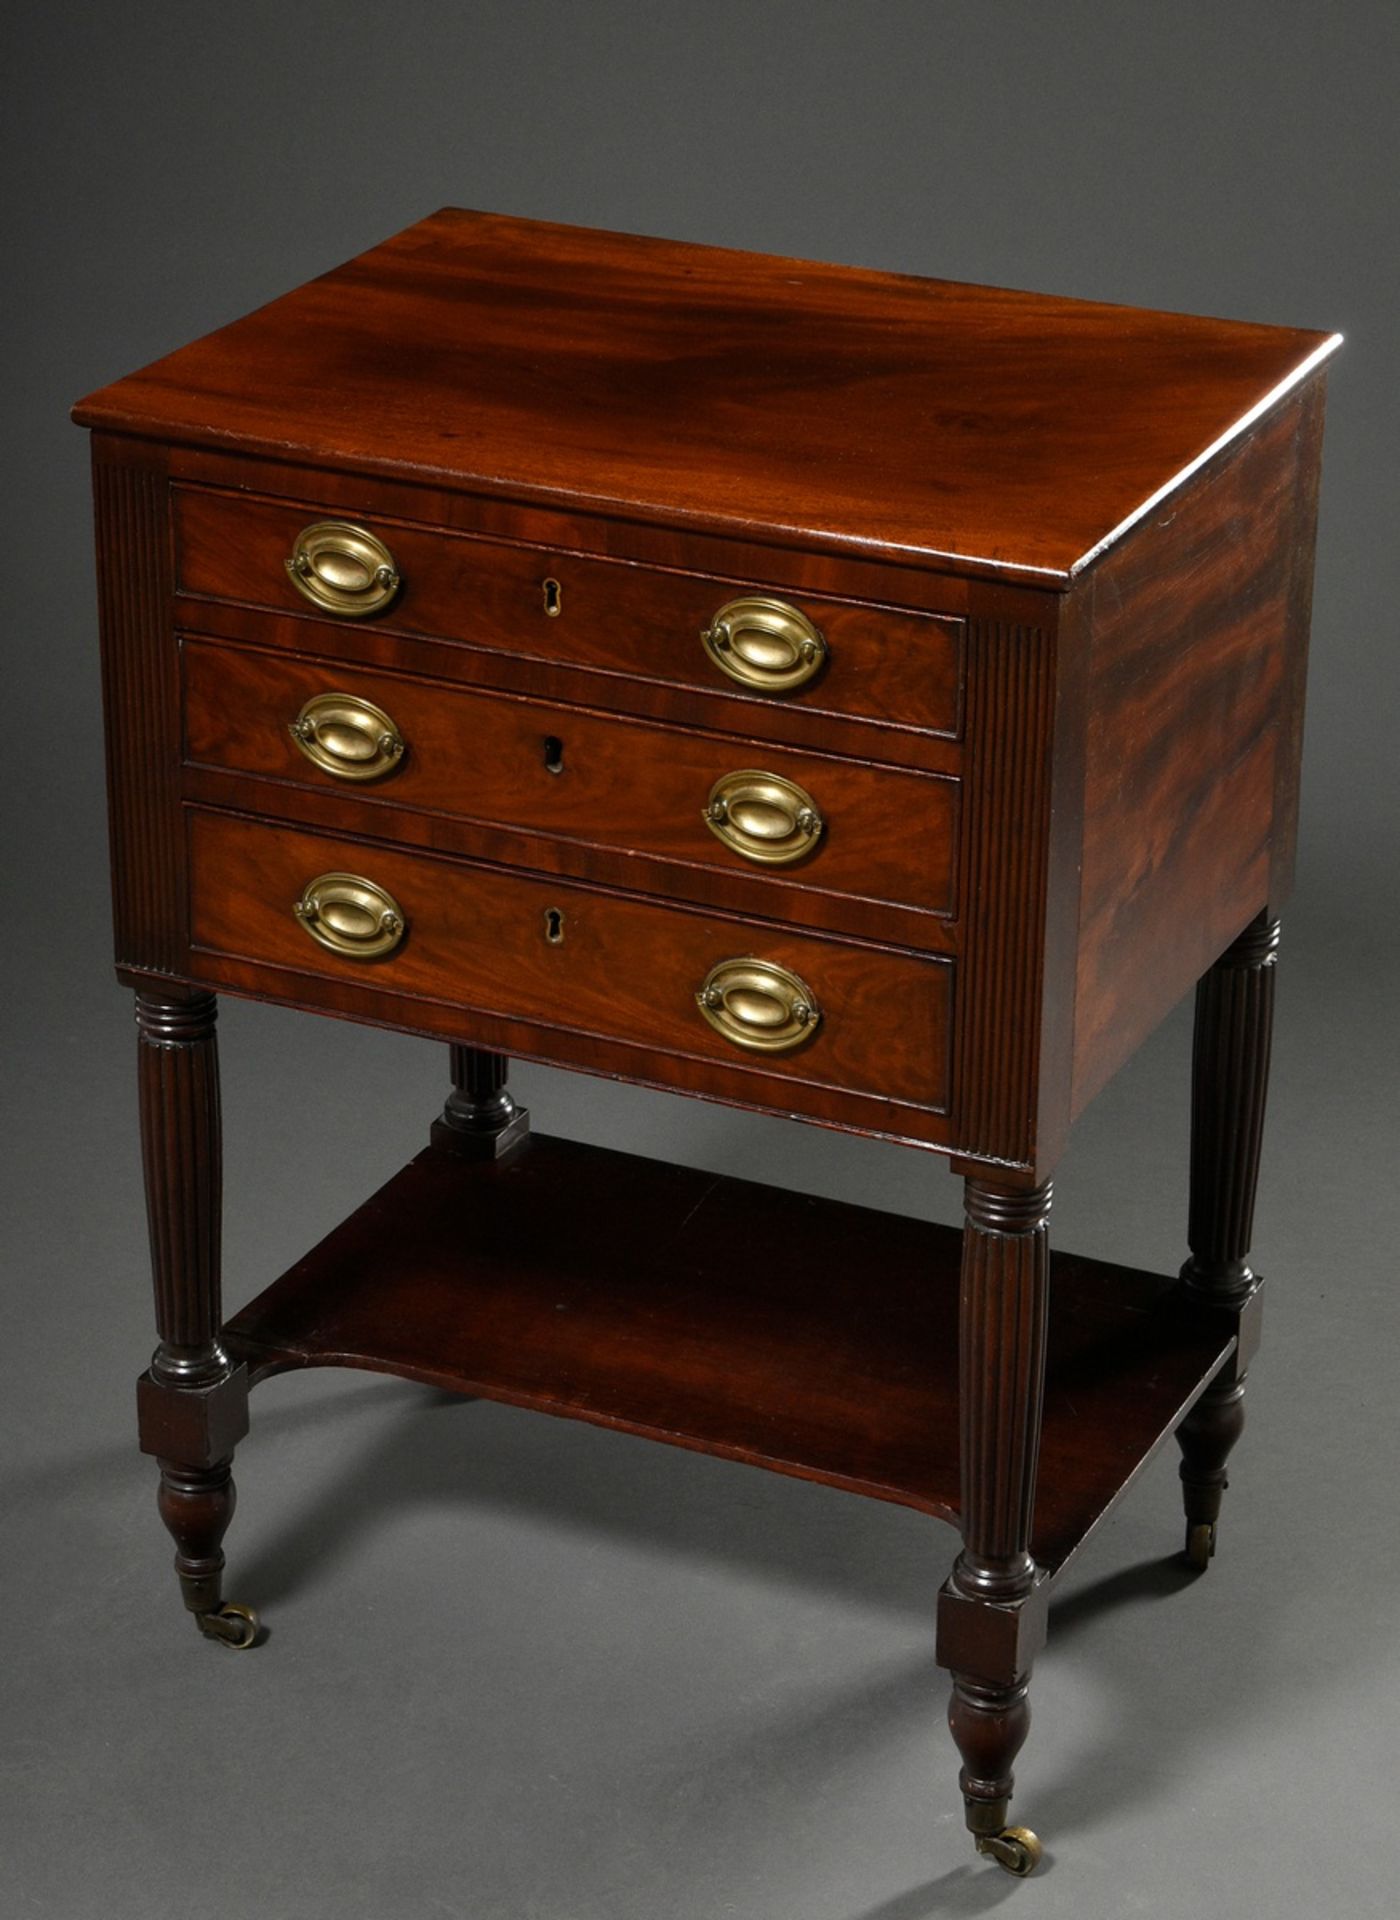 Three-bay occasional furniture on fluted legs with pull-out writing drawer and punched leather top,